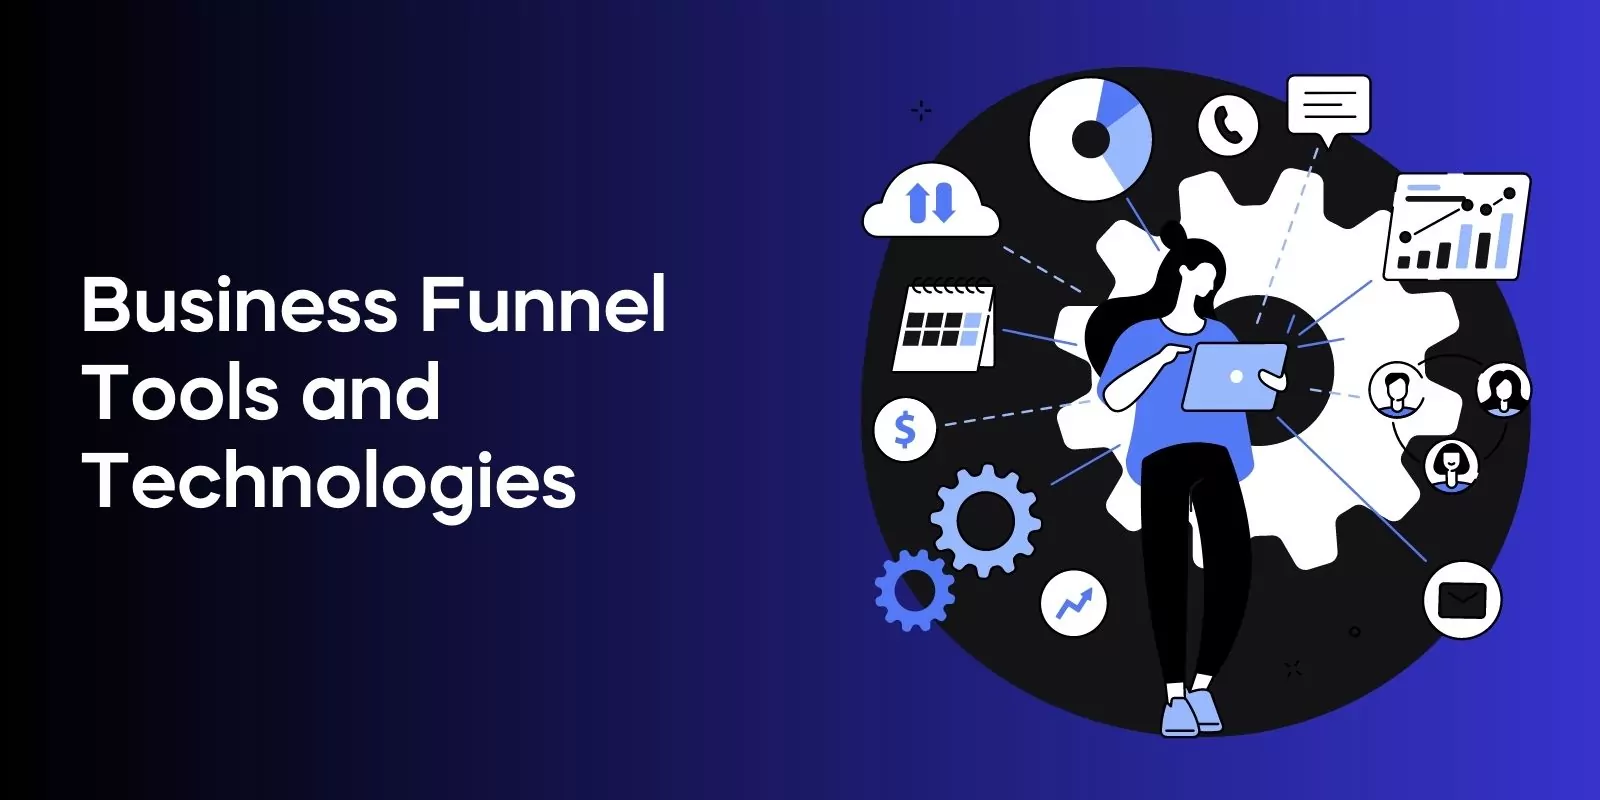 Business Funnel Tools and Technologies